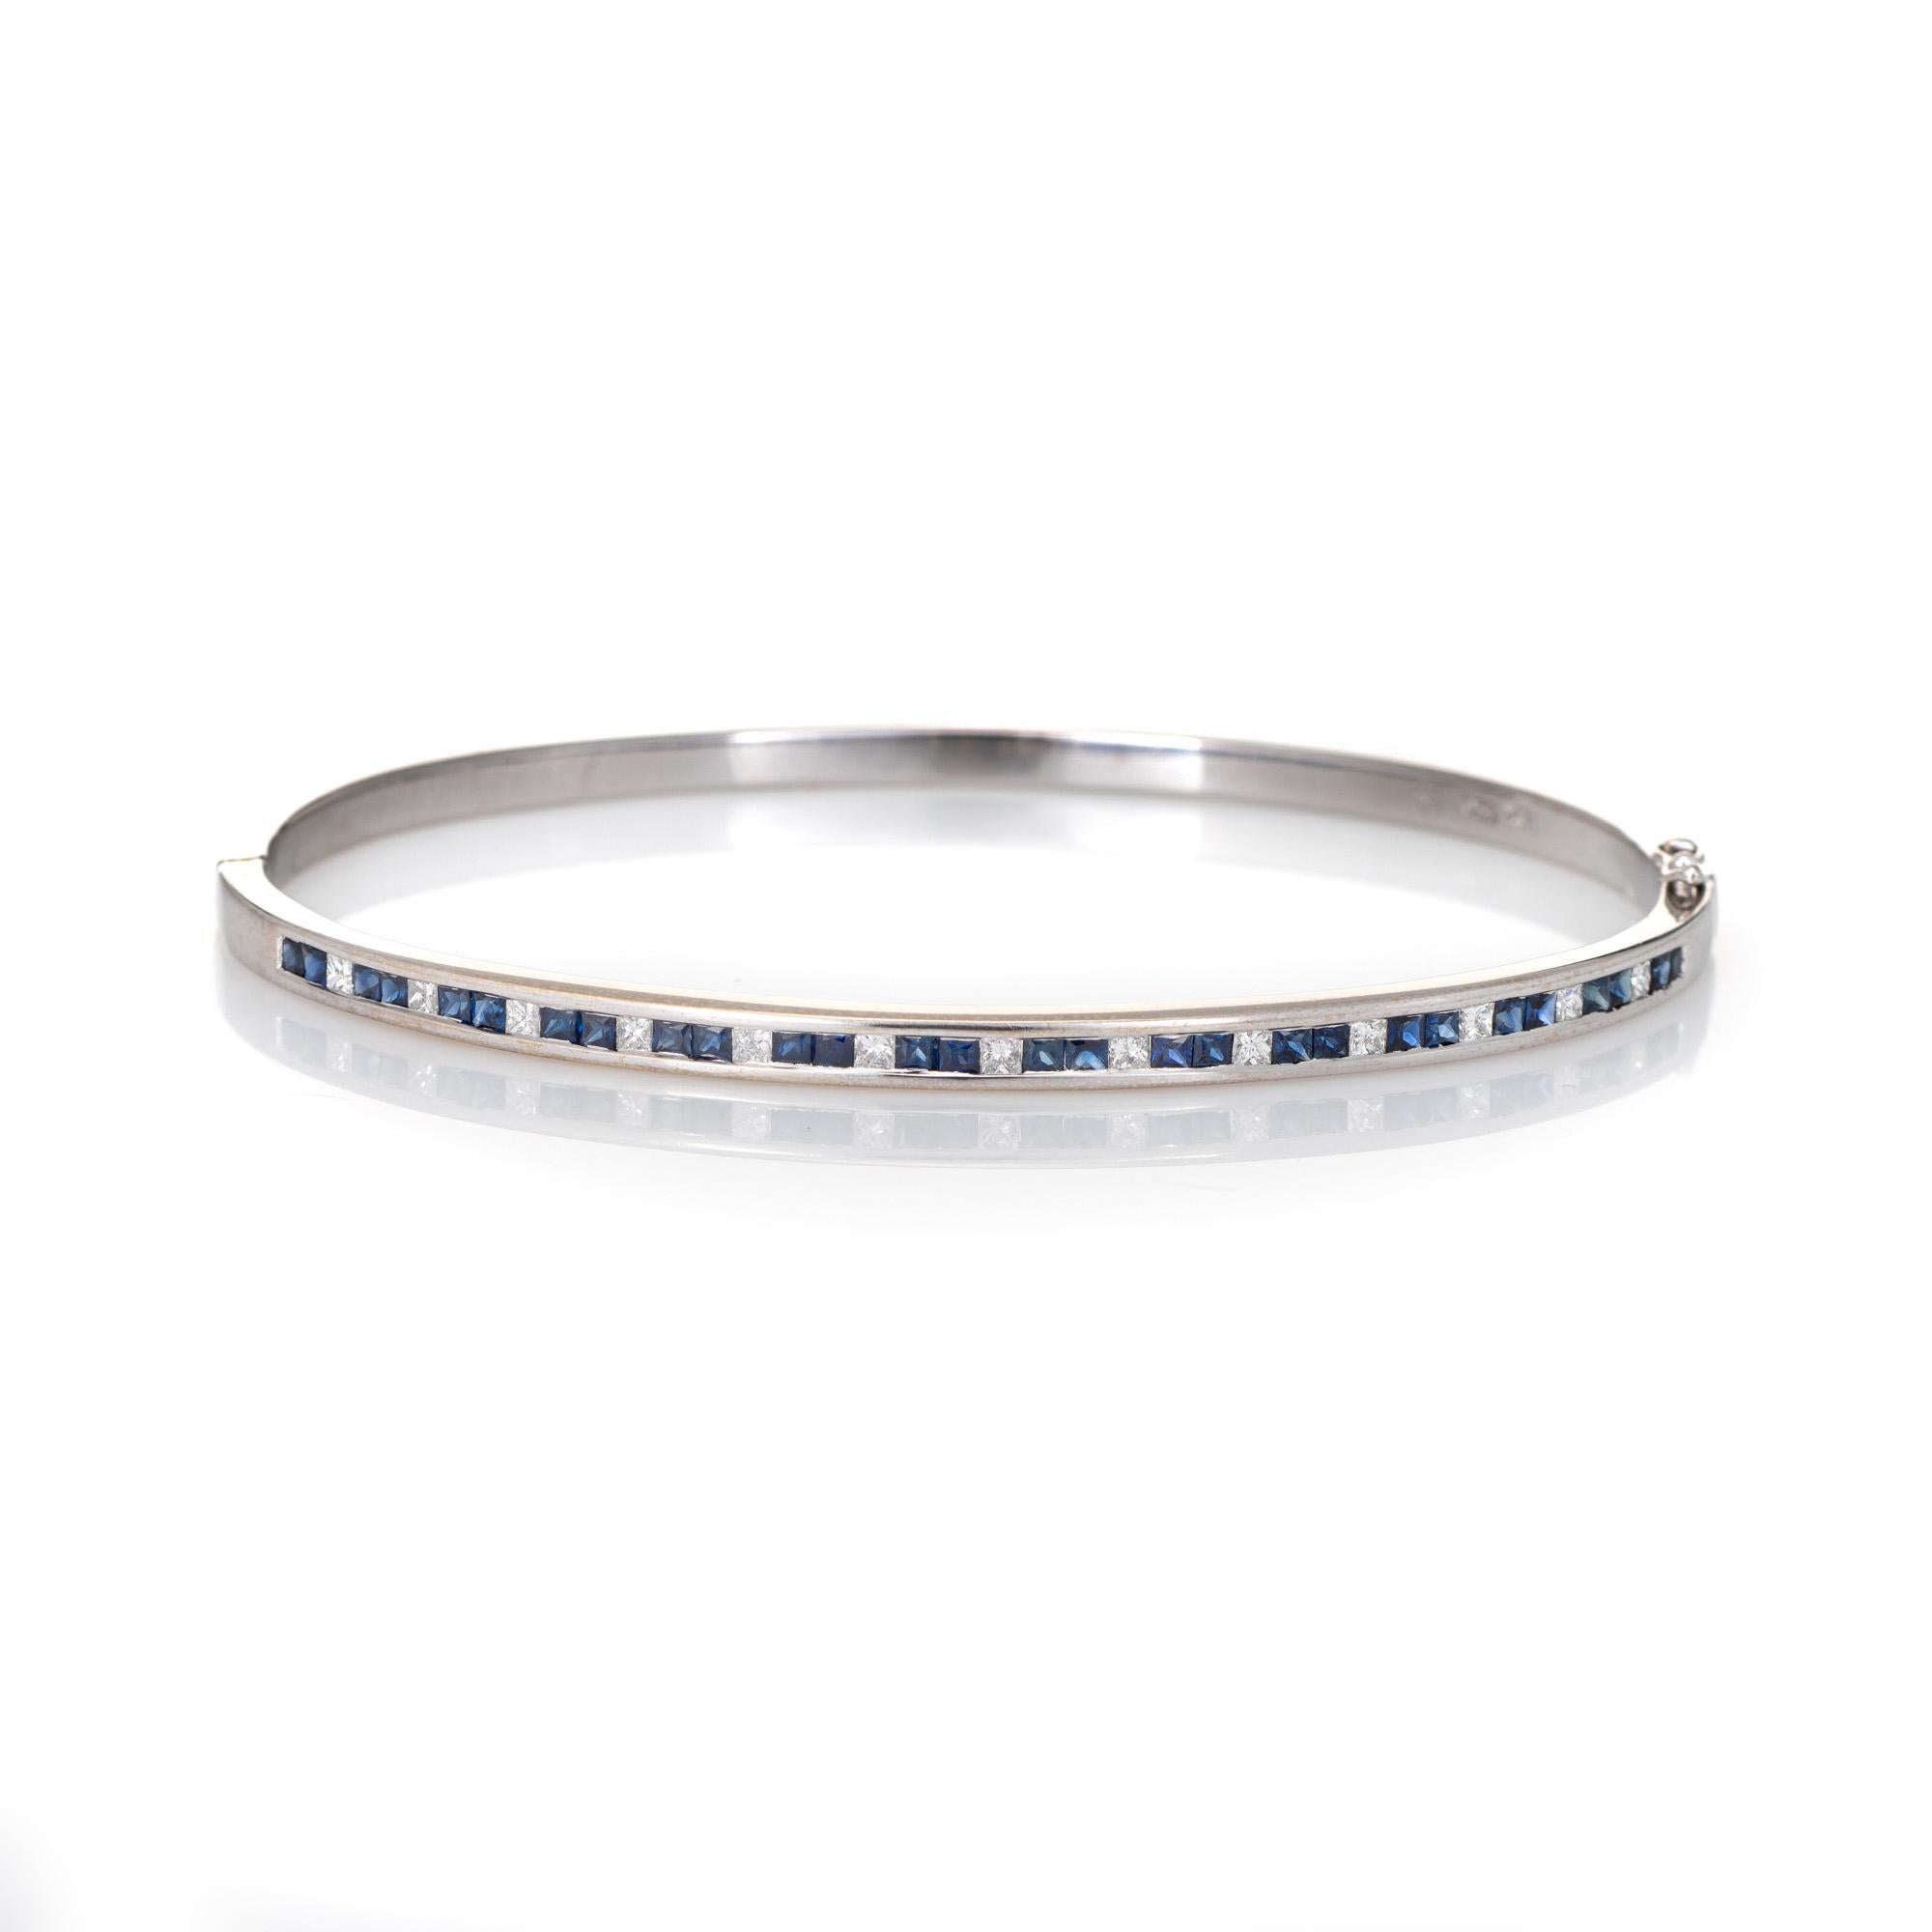 Finely detailed estate sapphire & diamond bangle bracelet crafted in 18k white gold. 

28 French cut sapphires are estimated at 0.02 carats each and total an estimated 0.56 carats. 13 estimated 0.02 carat princess cut diamonds total an estimated